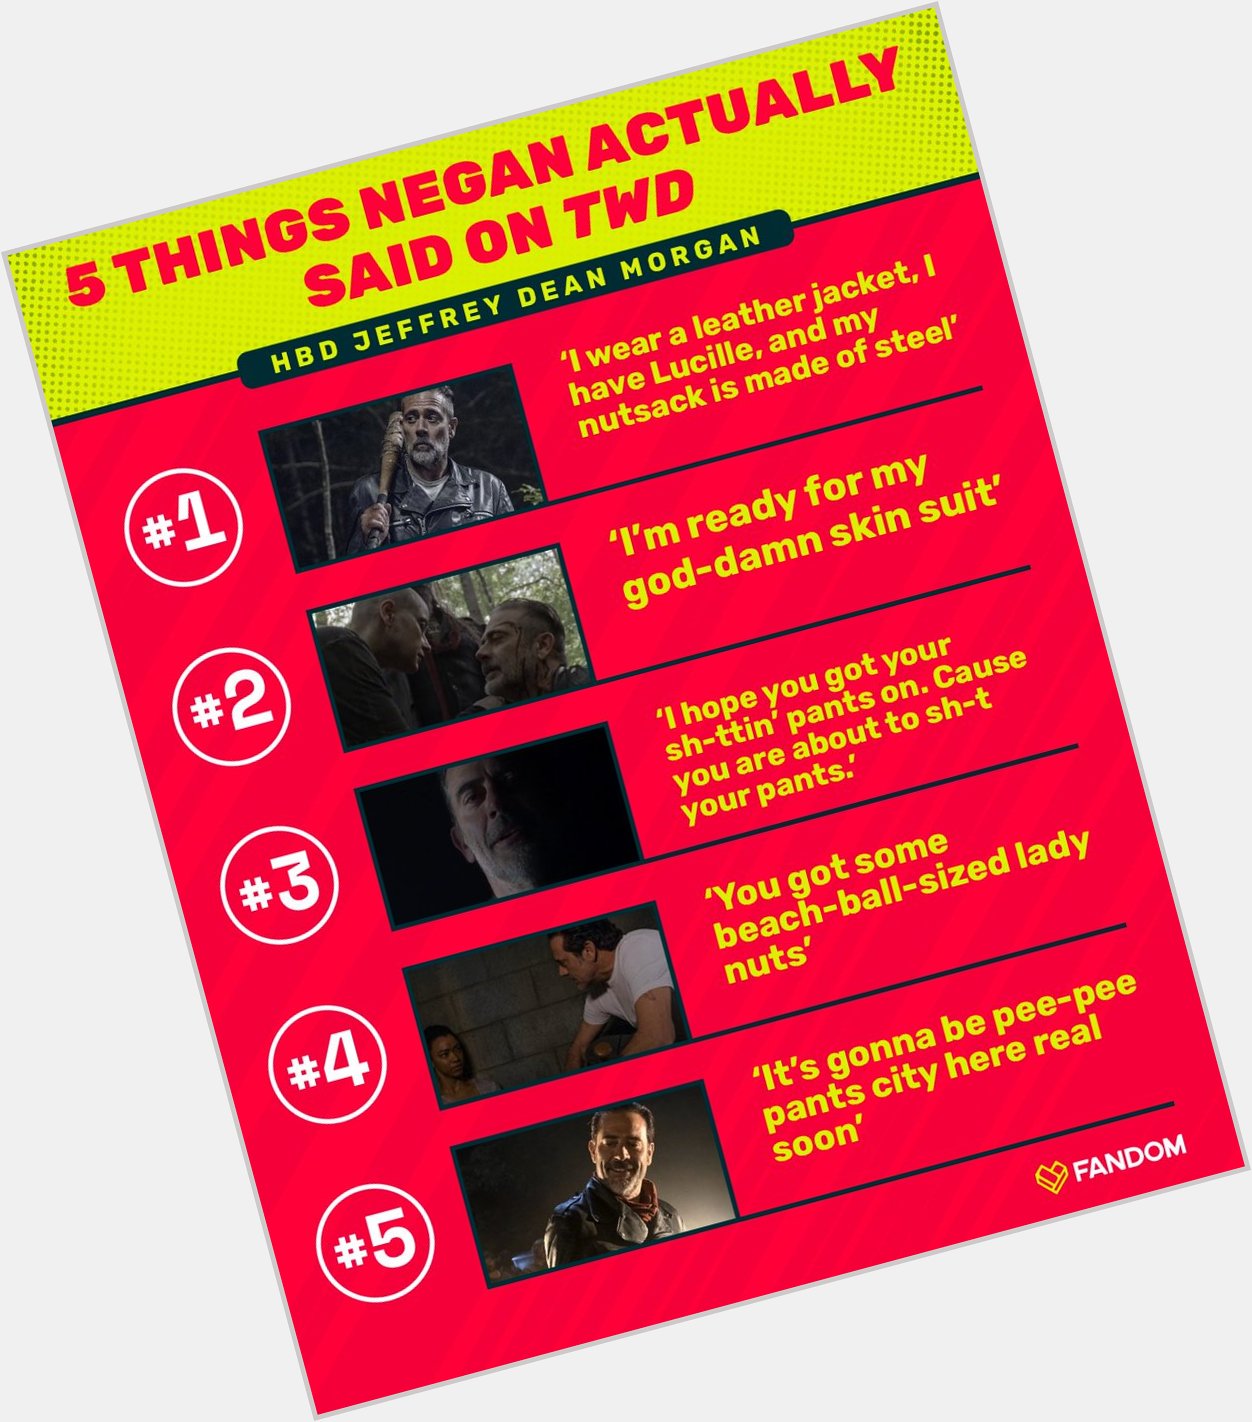 Happy Birthday Jeffrey Dean Morgan  Which of these Negan quotes are you nabbing for your new bio? 